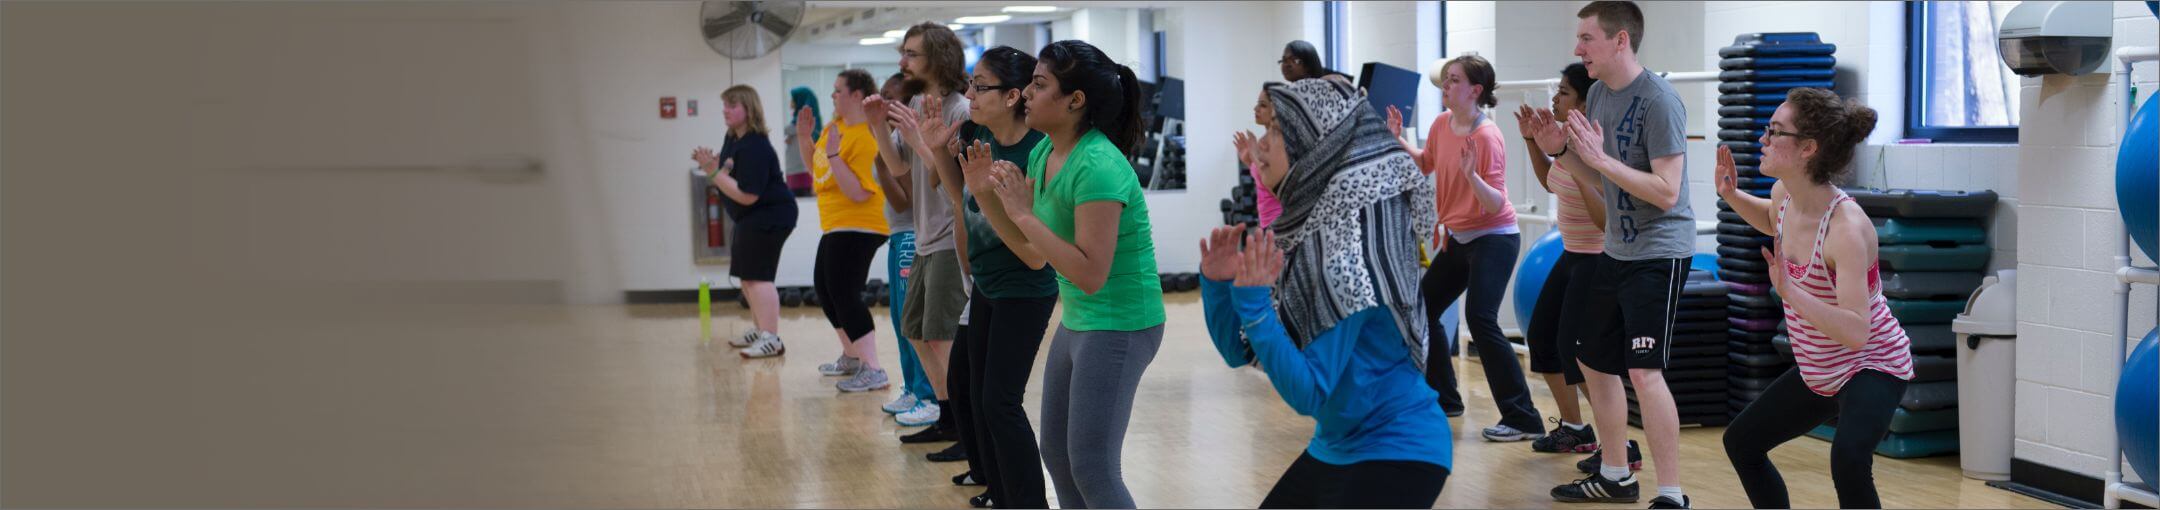 Students taking a fitness class in a studio.